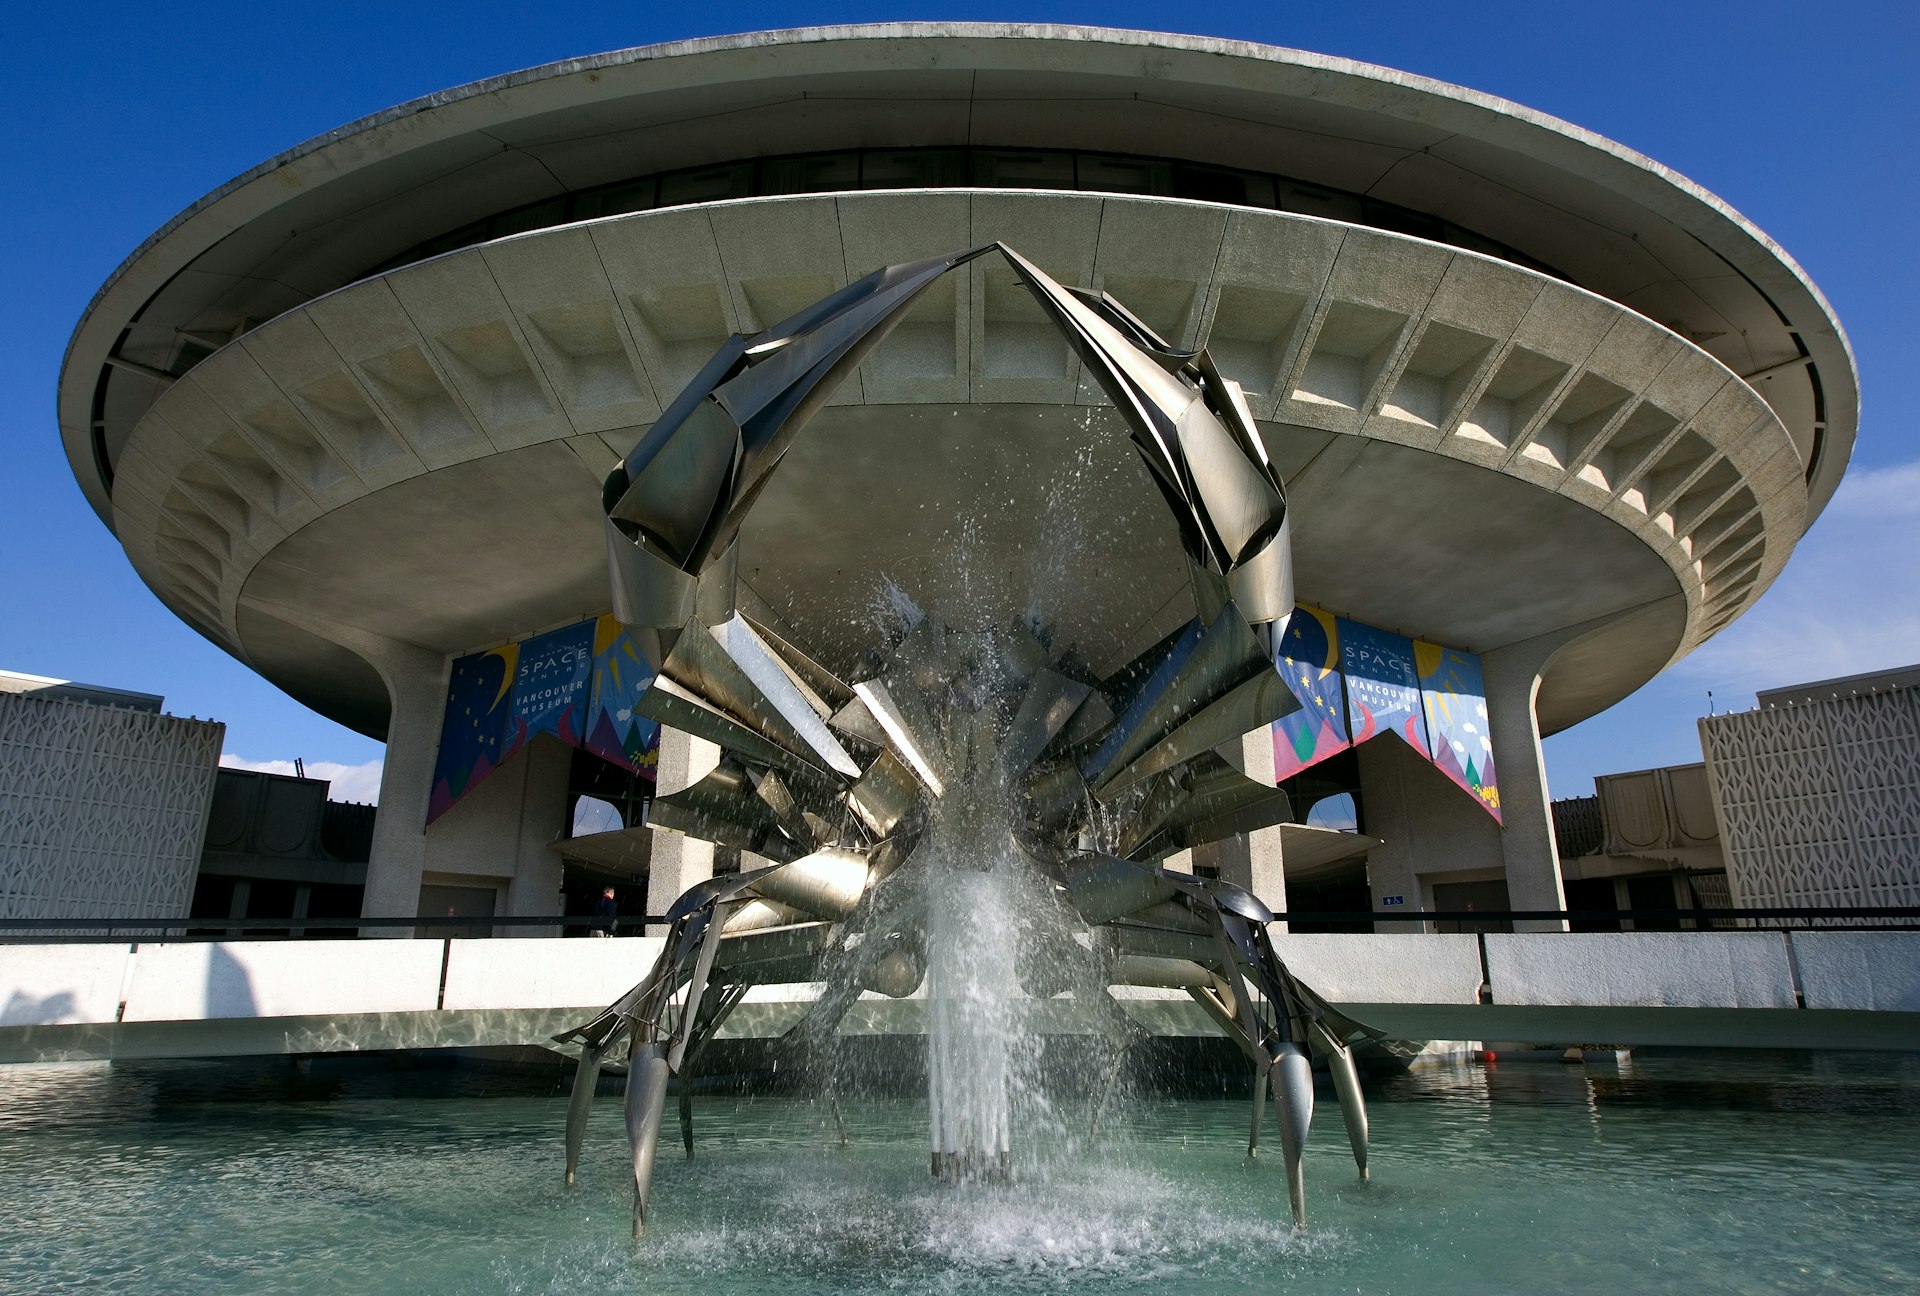 The giant crab sculpture stands guard in front of the H.R. MacMillan Space Centre